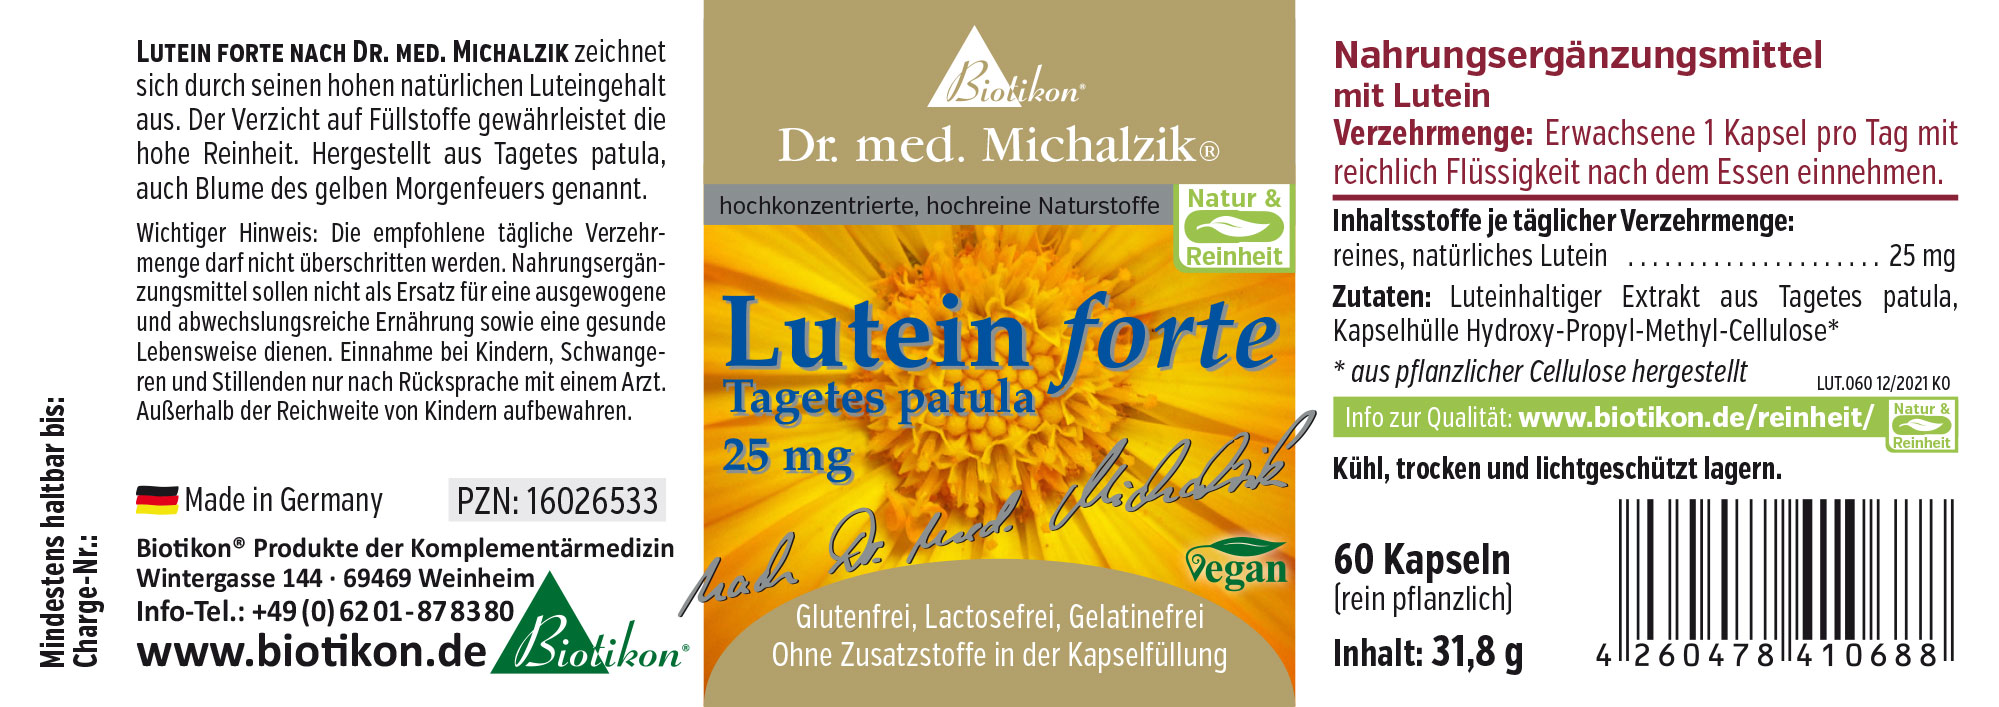 Lutein forte